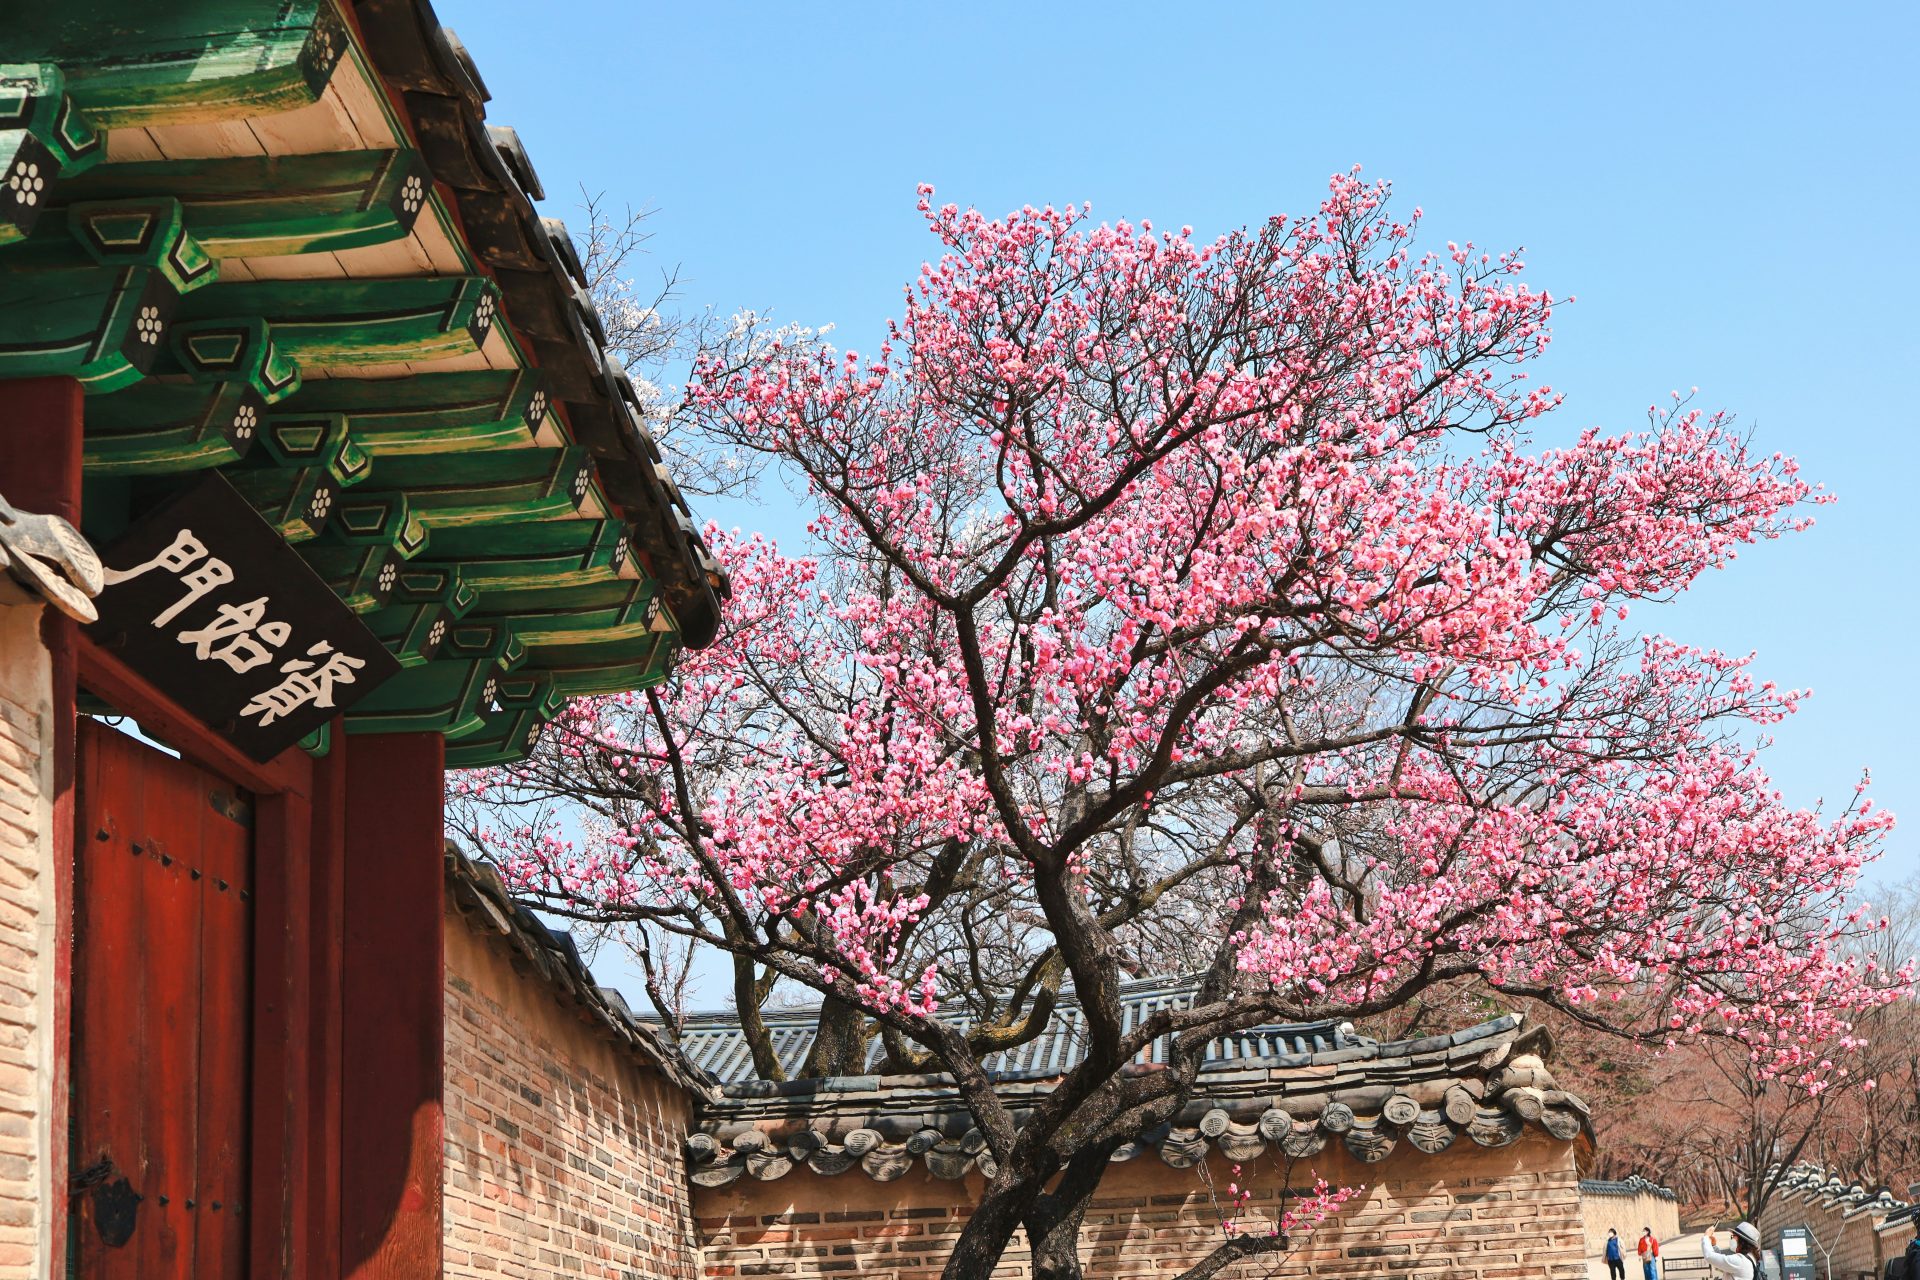 <p>In addition to the 13 historic buildings, the garden, which incorporates Korean landscaping techniques, is a major attraction.</p> <p>Image: Soyoung Han / Unsplash</p>